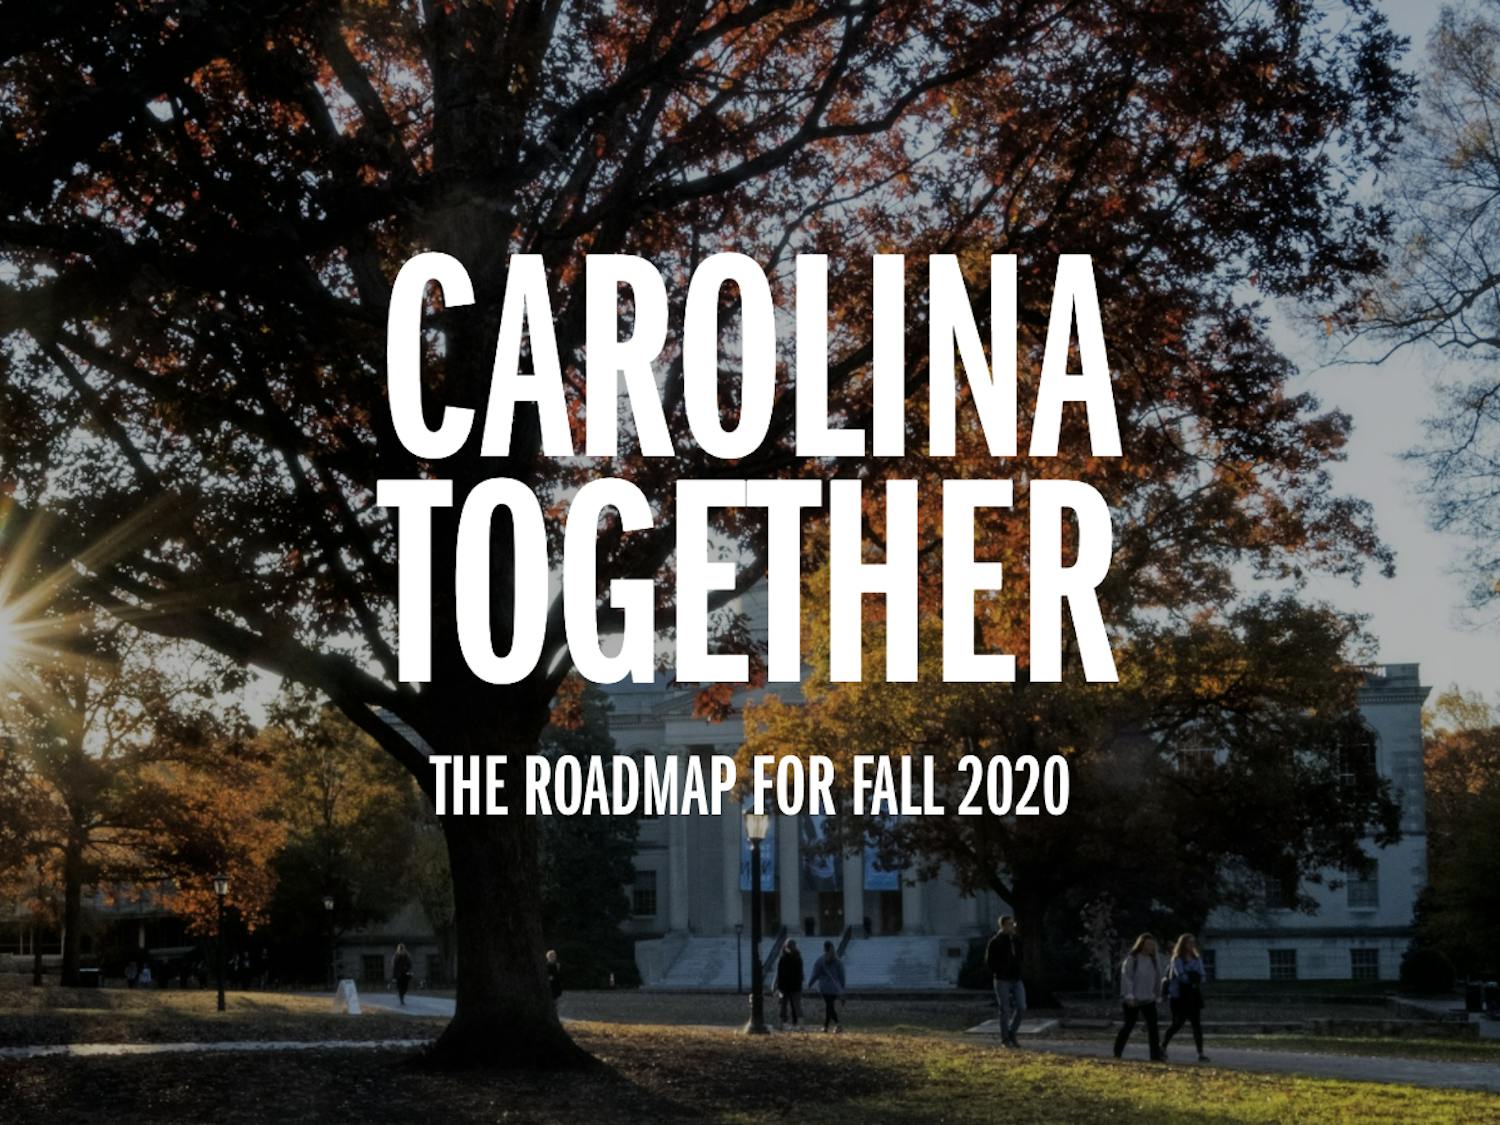 The header image for the newly-launched Carolina Roadmap website at UNC explaining the details of UNC's fall reopening